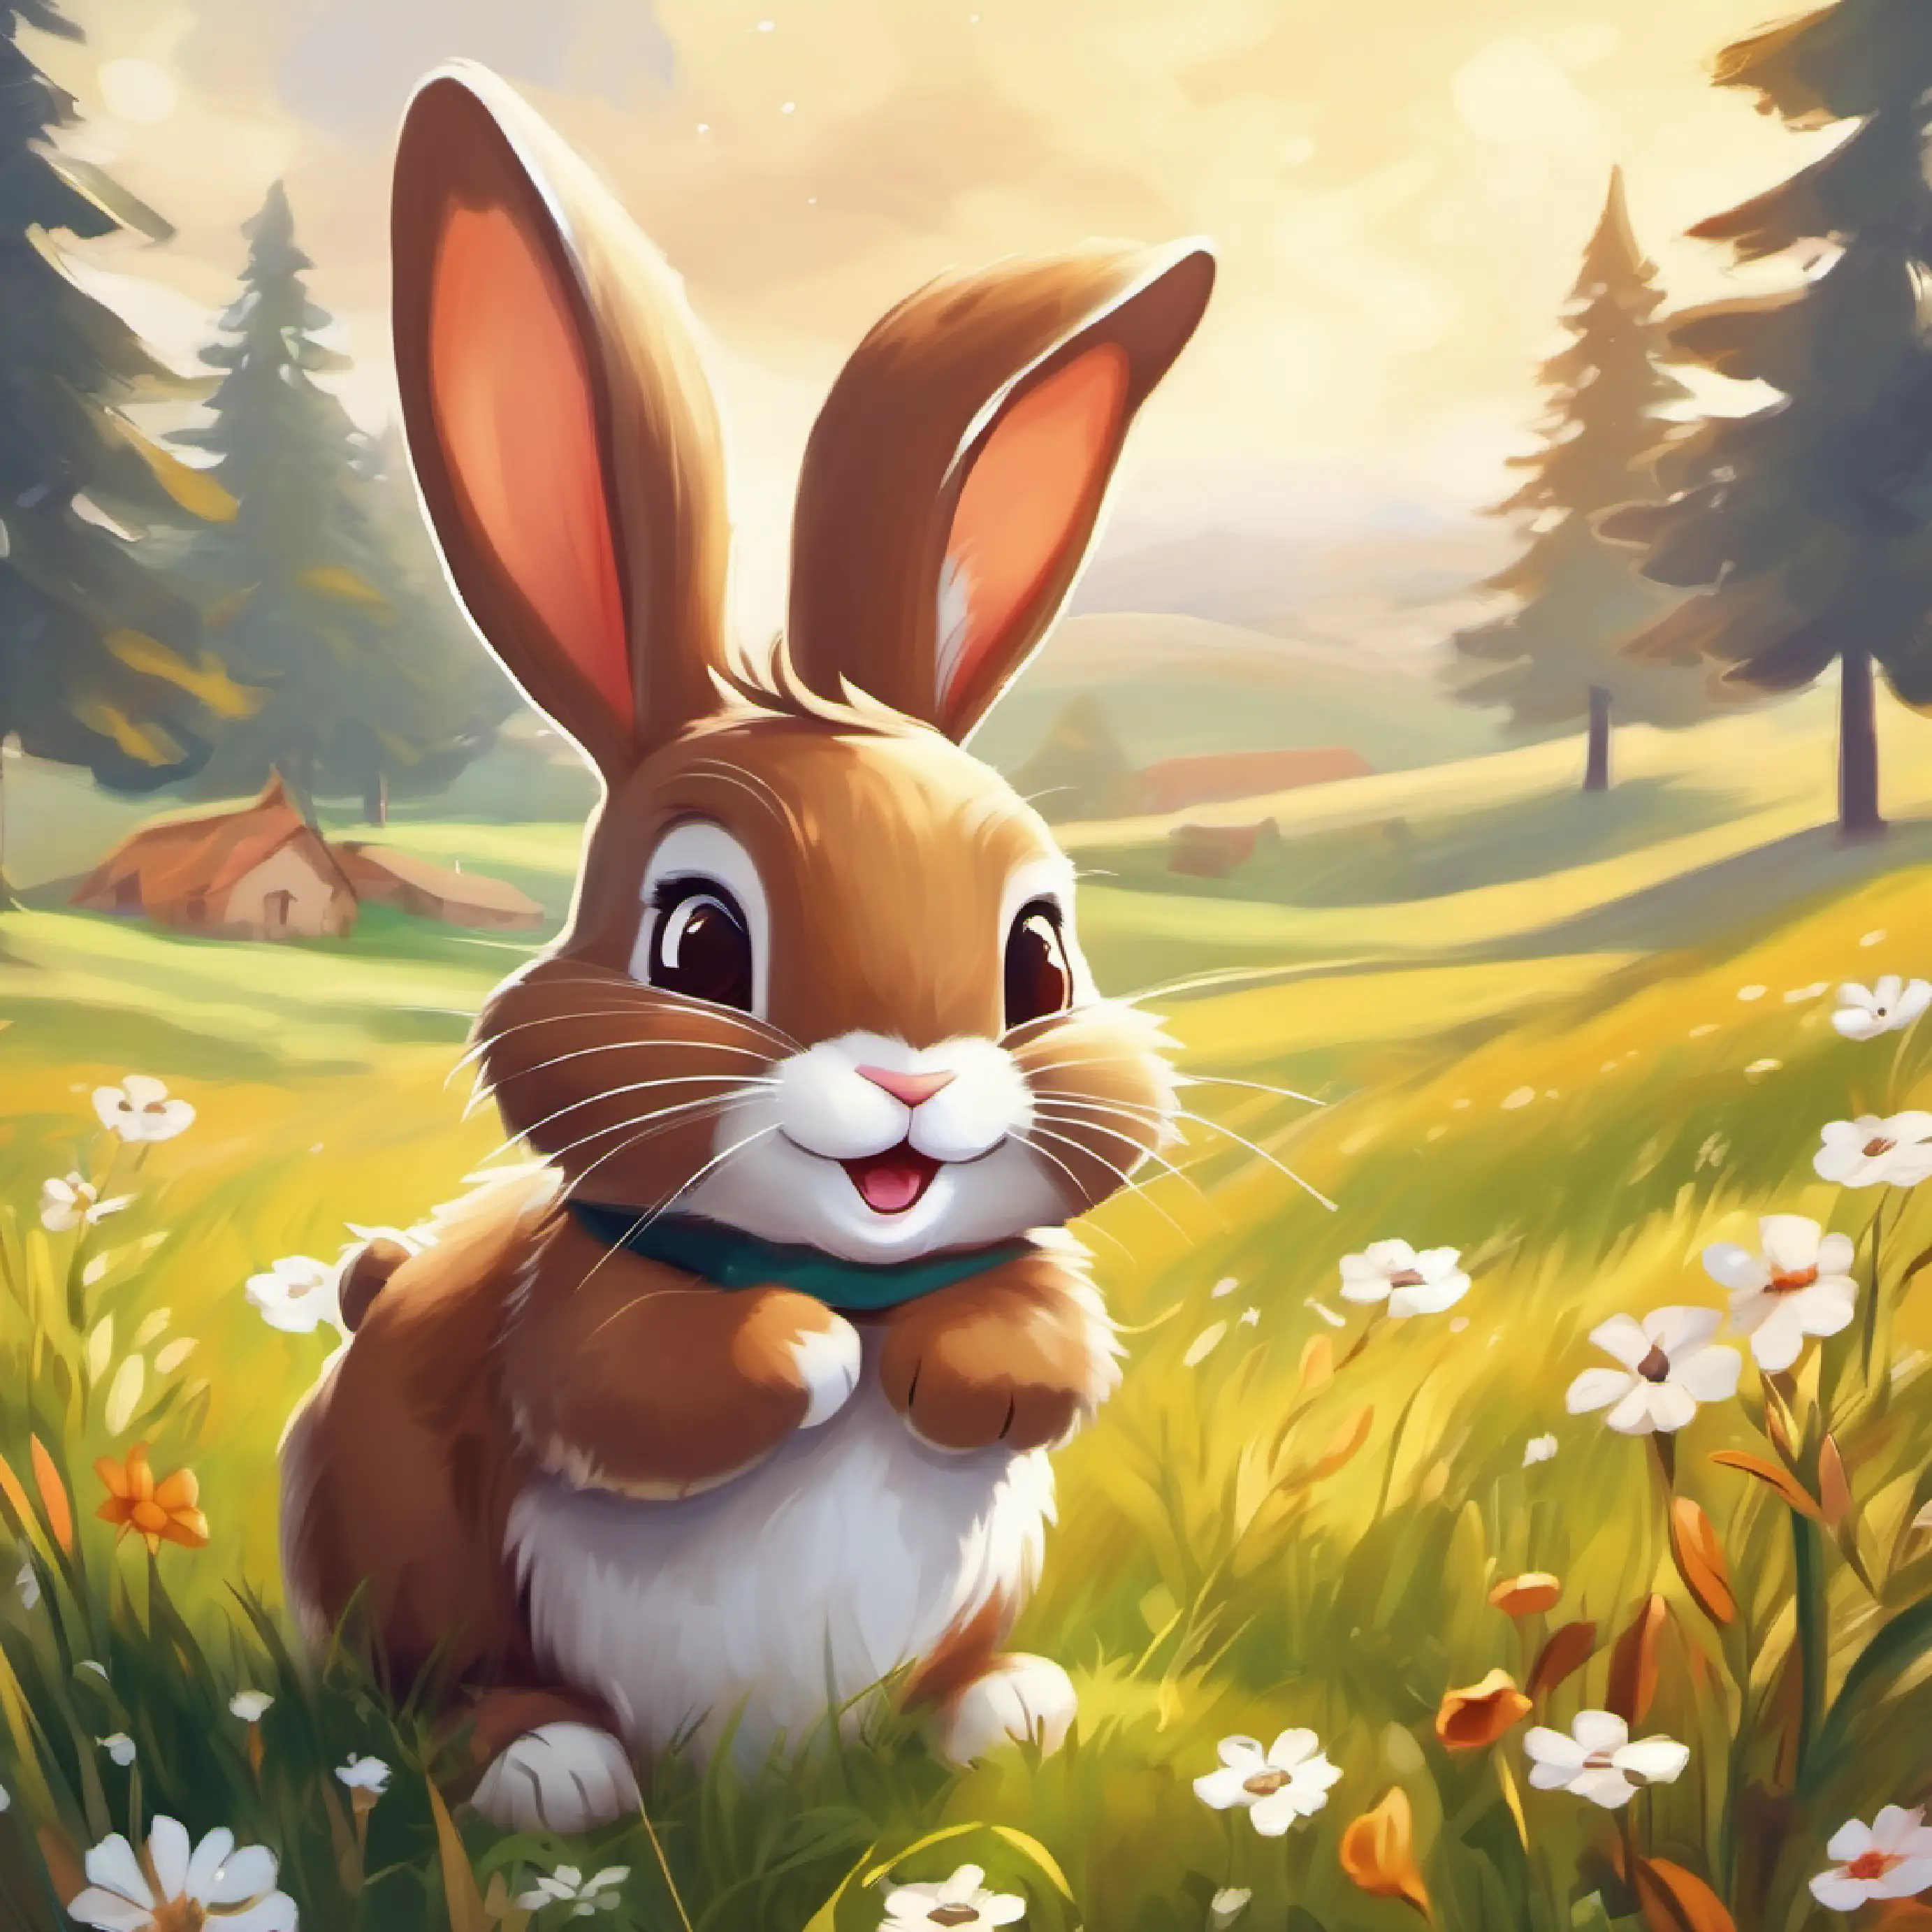 Introduces A brown and so happy rabbit with white paws in a meadow